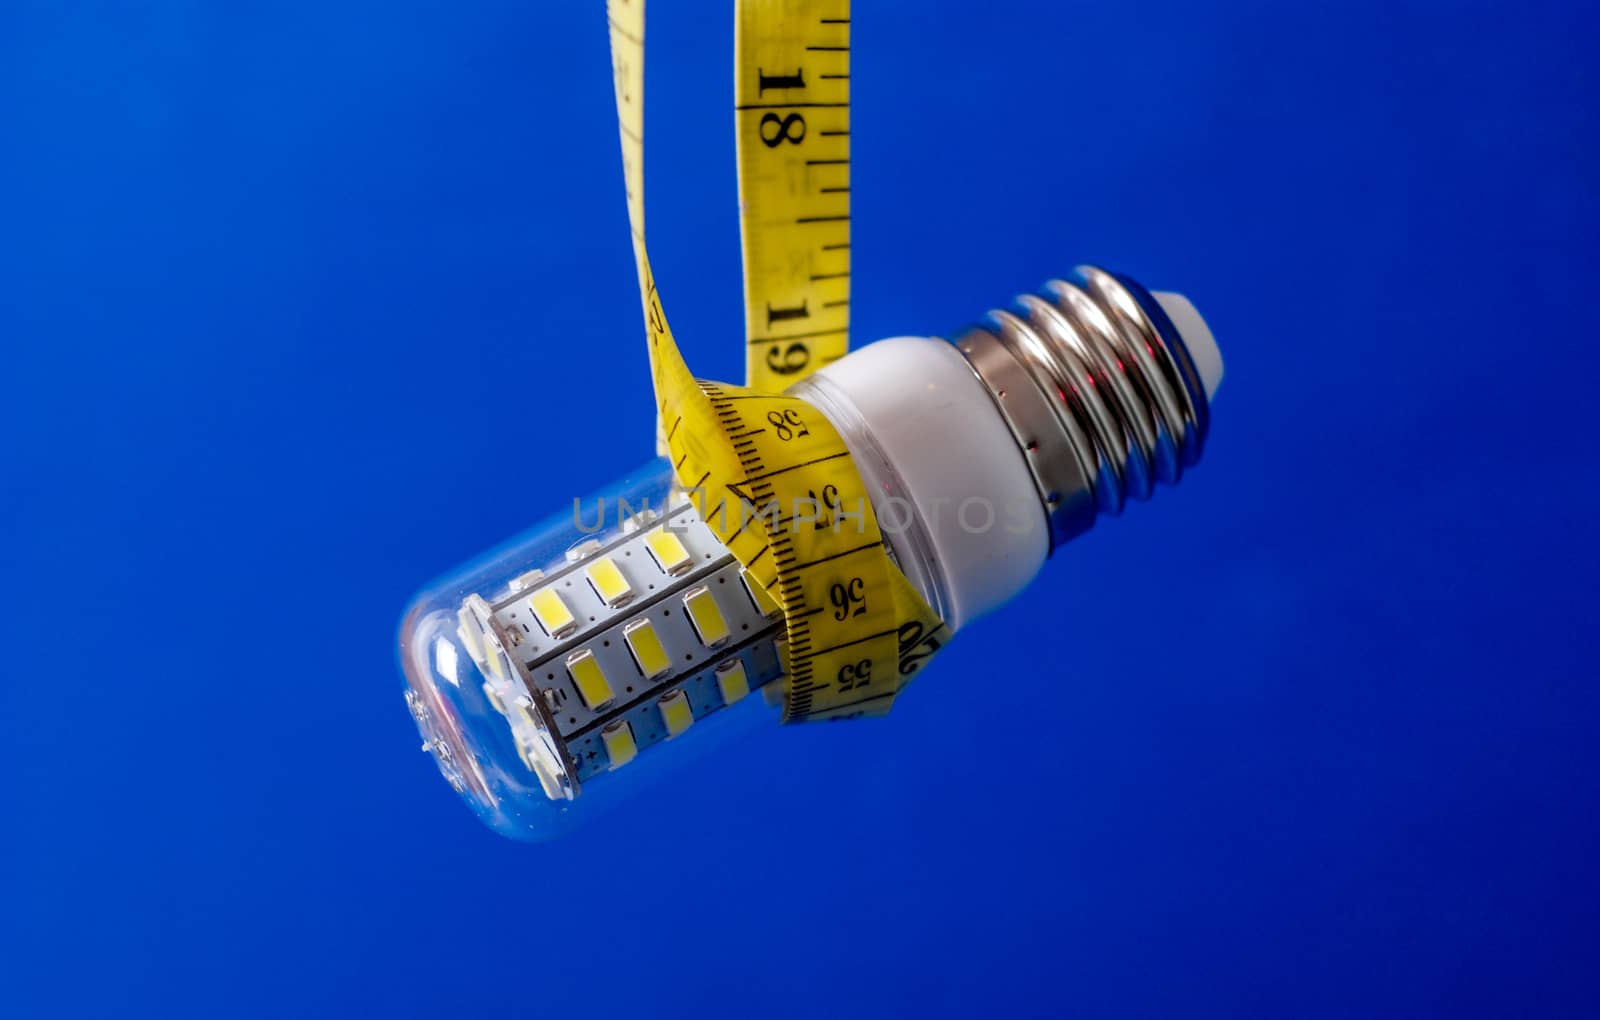  Picture of a  Energy saving LED light bulb 